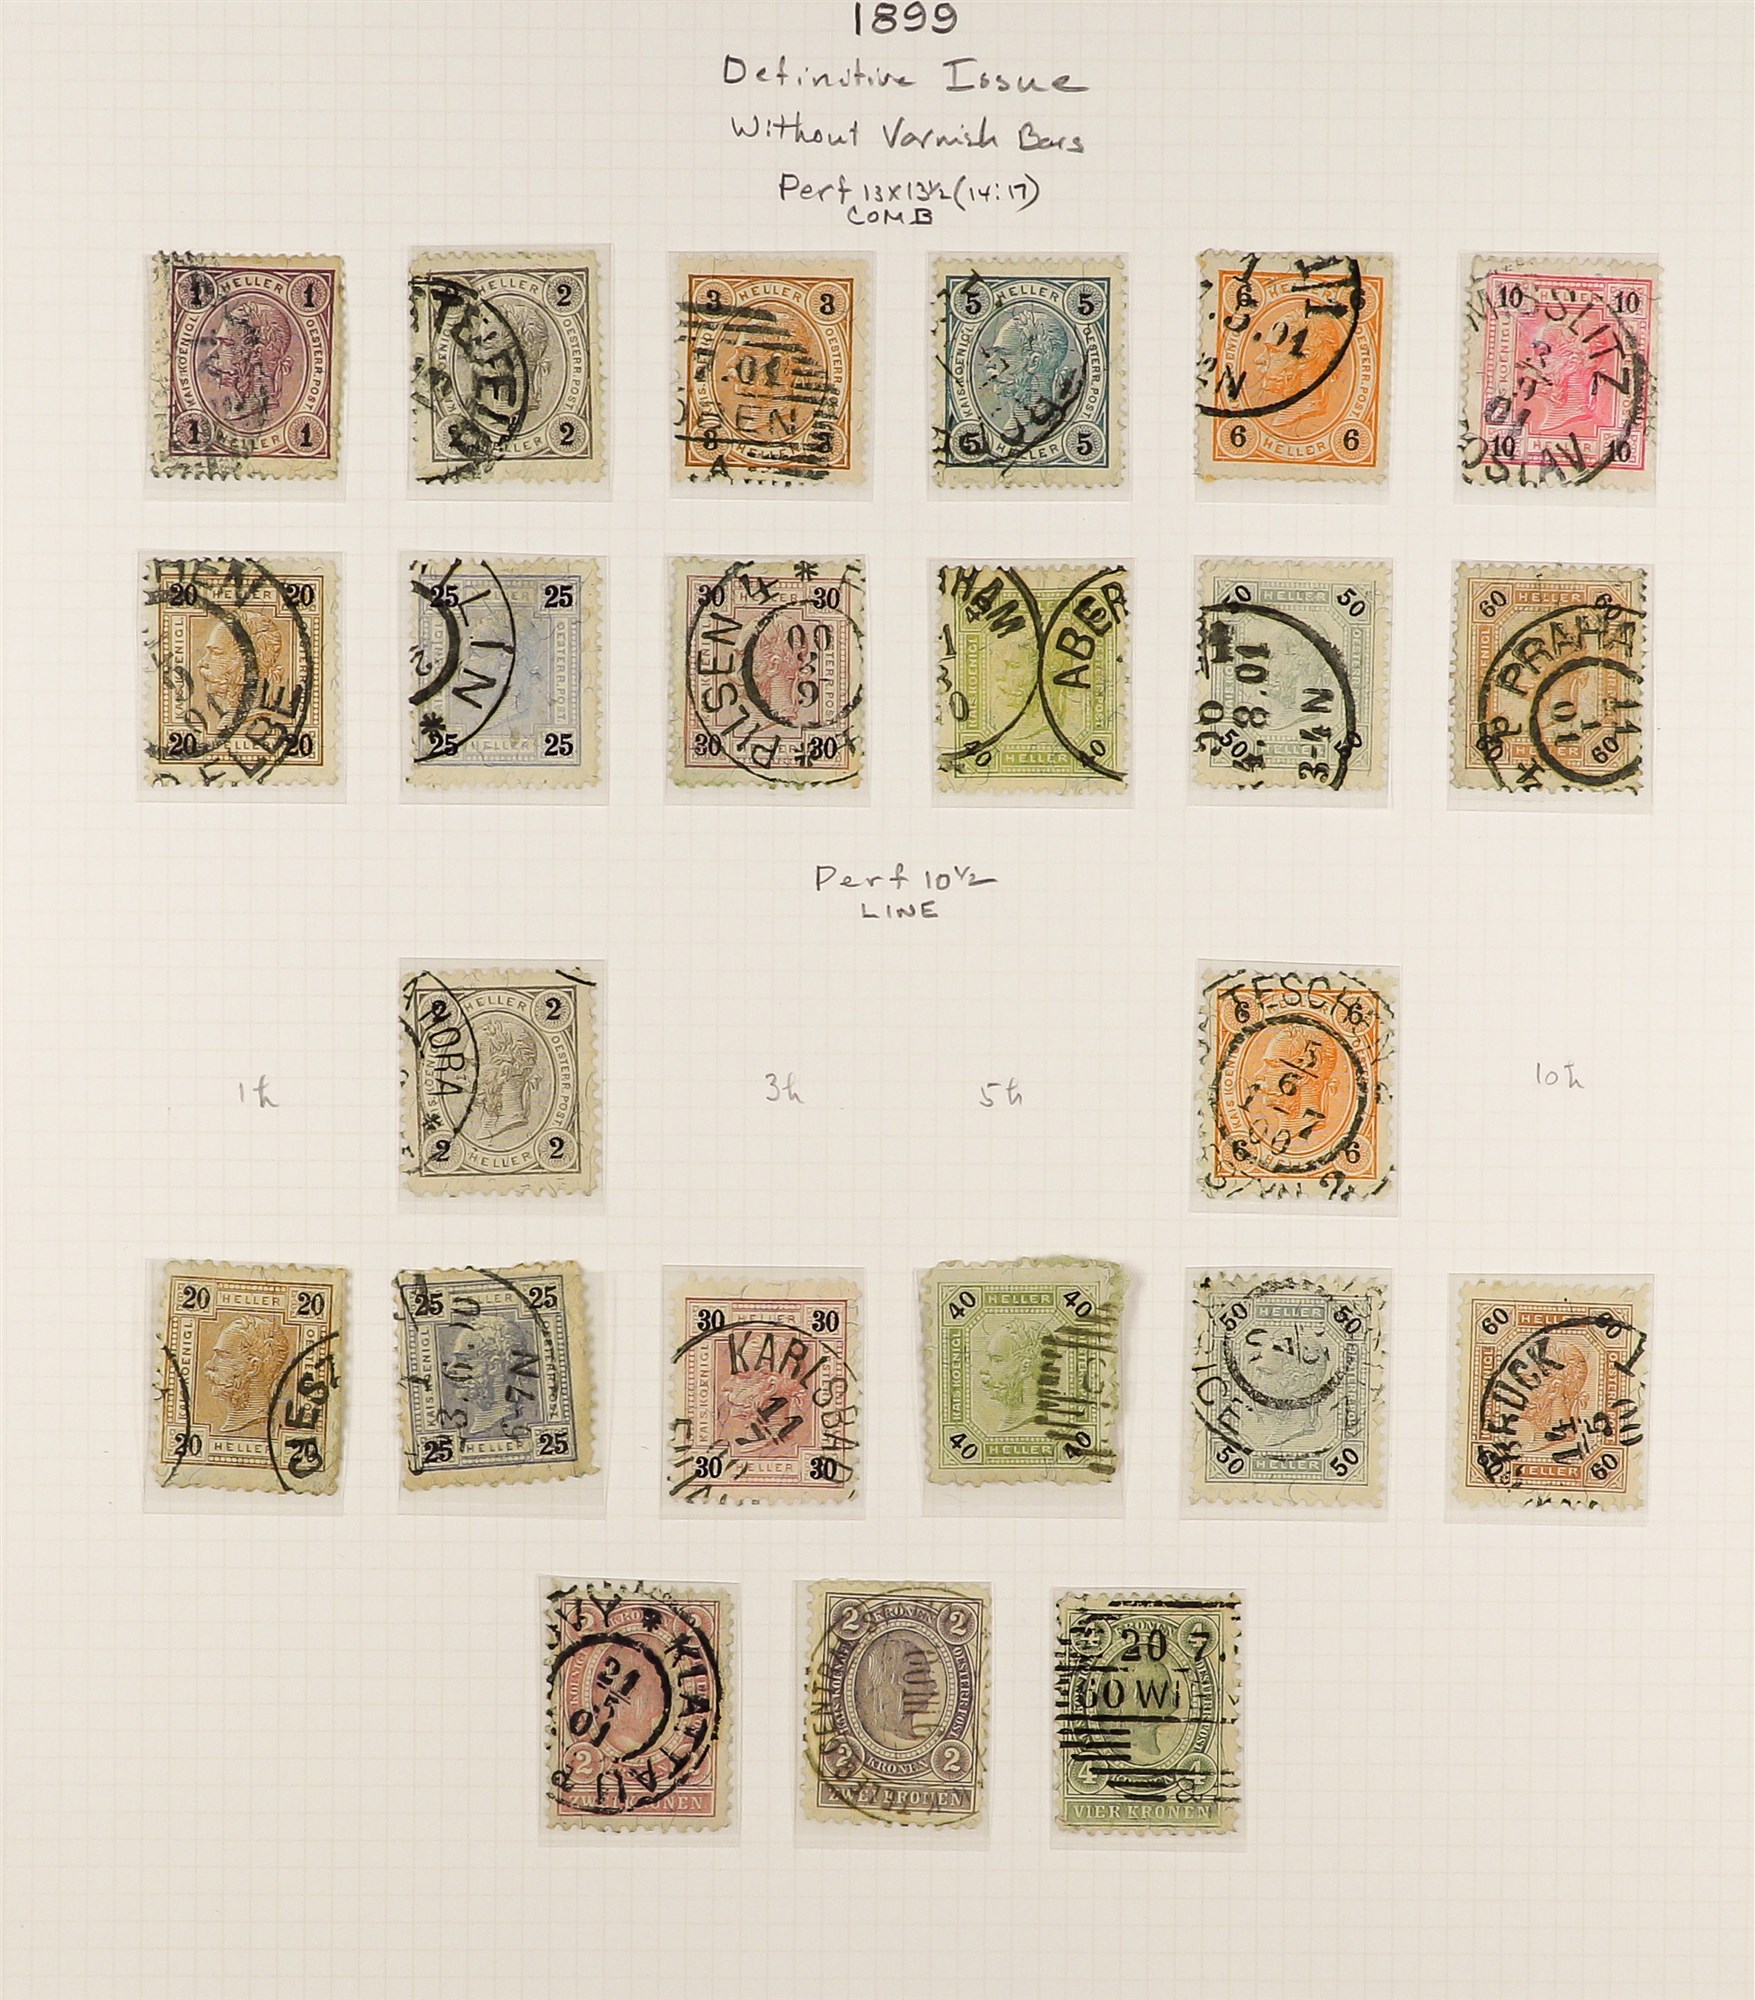 AUSTRIA 1890 - 1907 FRANZ JOSEF DEFINITIVES collection of over 300 stamps on album pages, semi- - Image 9 of 13